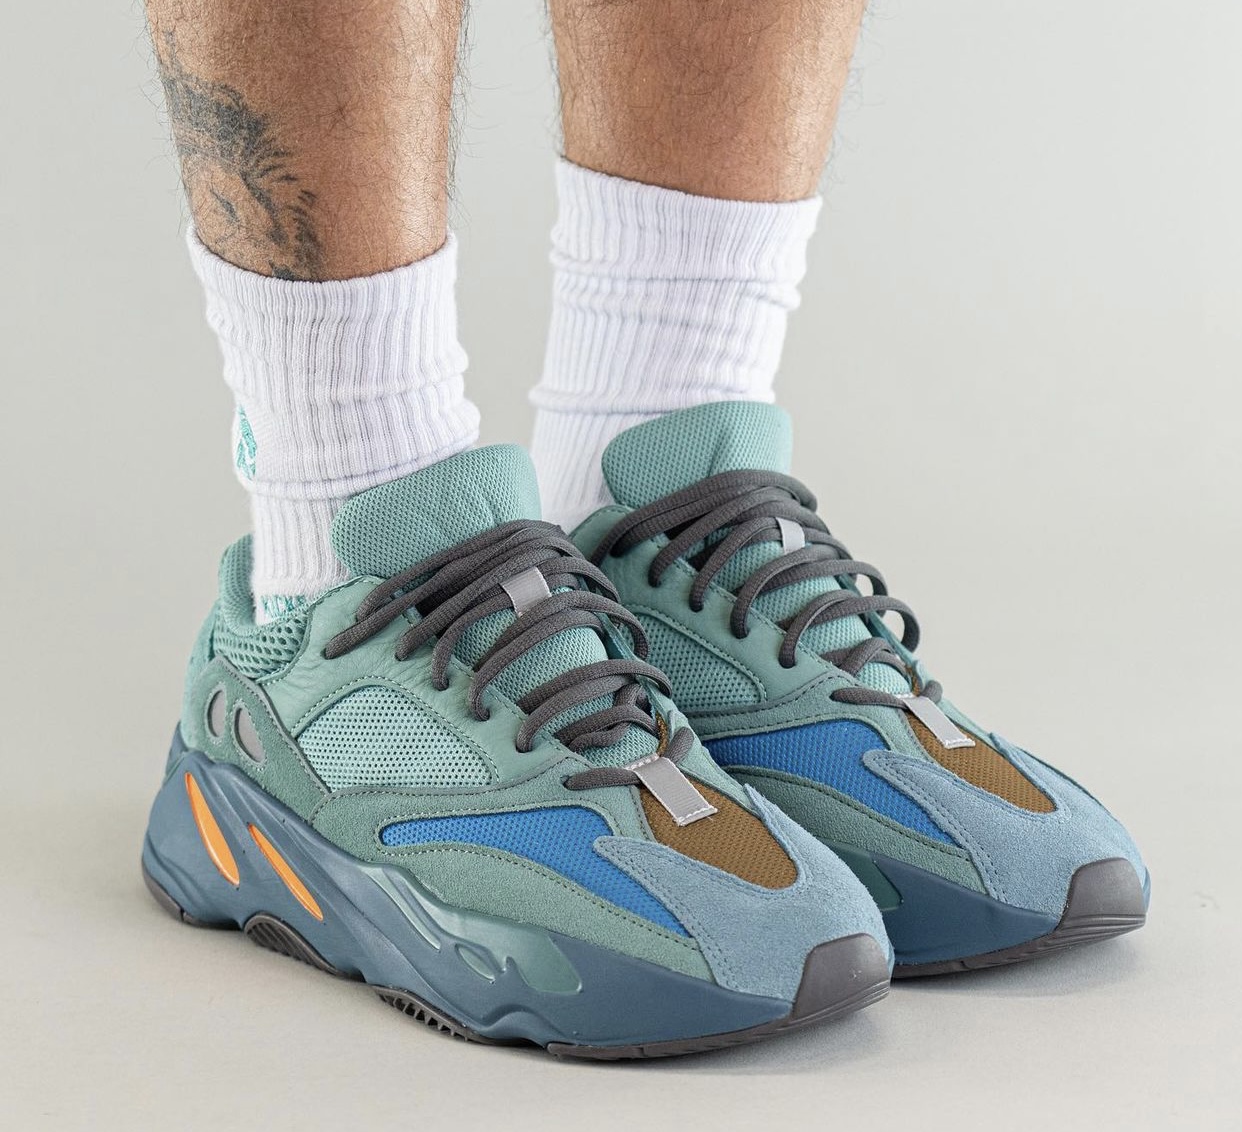 adidas Yeezy Boost 700 Faded Azure GZ2002 Release event On Feet